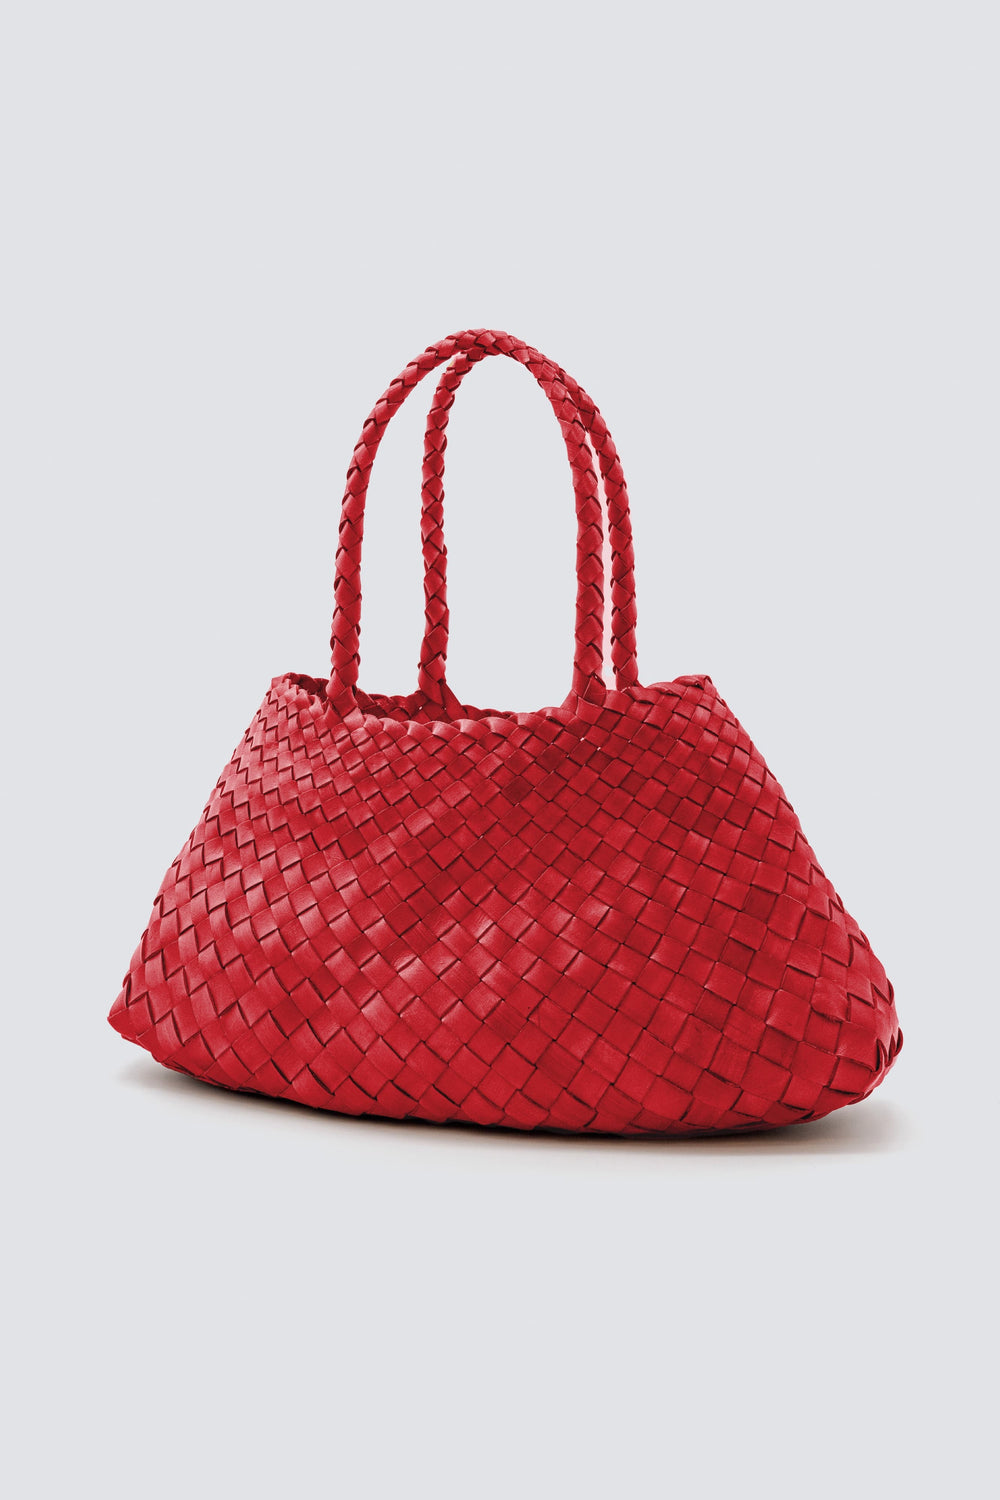 Harvey Nichols - Dragon Diffusion's woven bag is best worn with earthy  tones on sweet Saturday afternoons, just like Monikh.